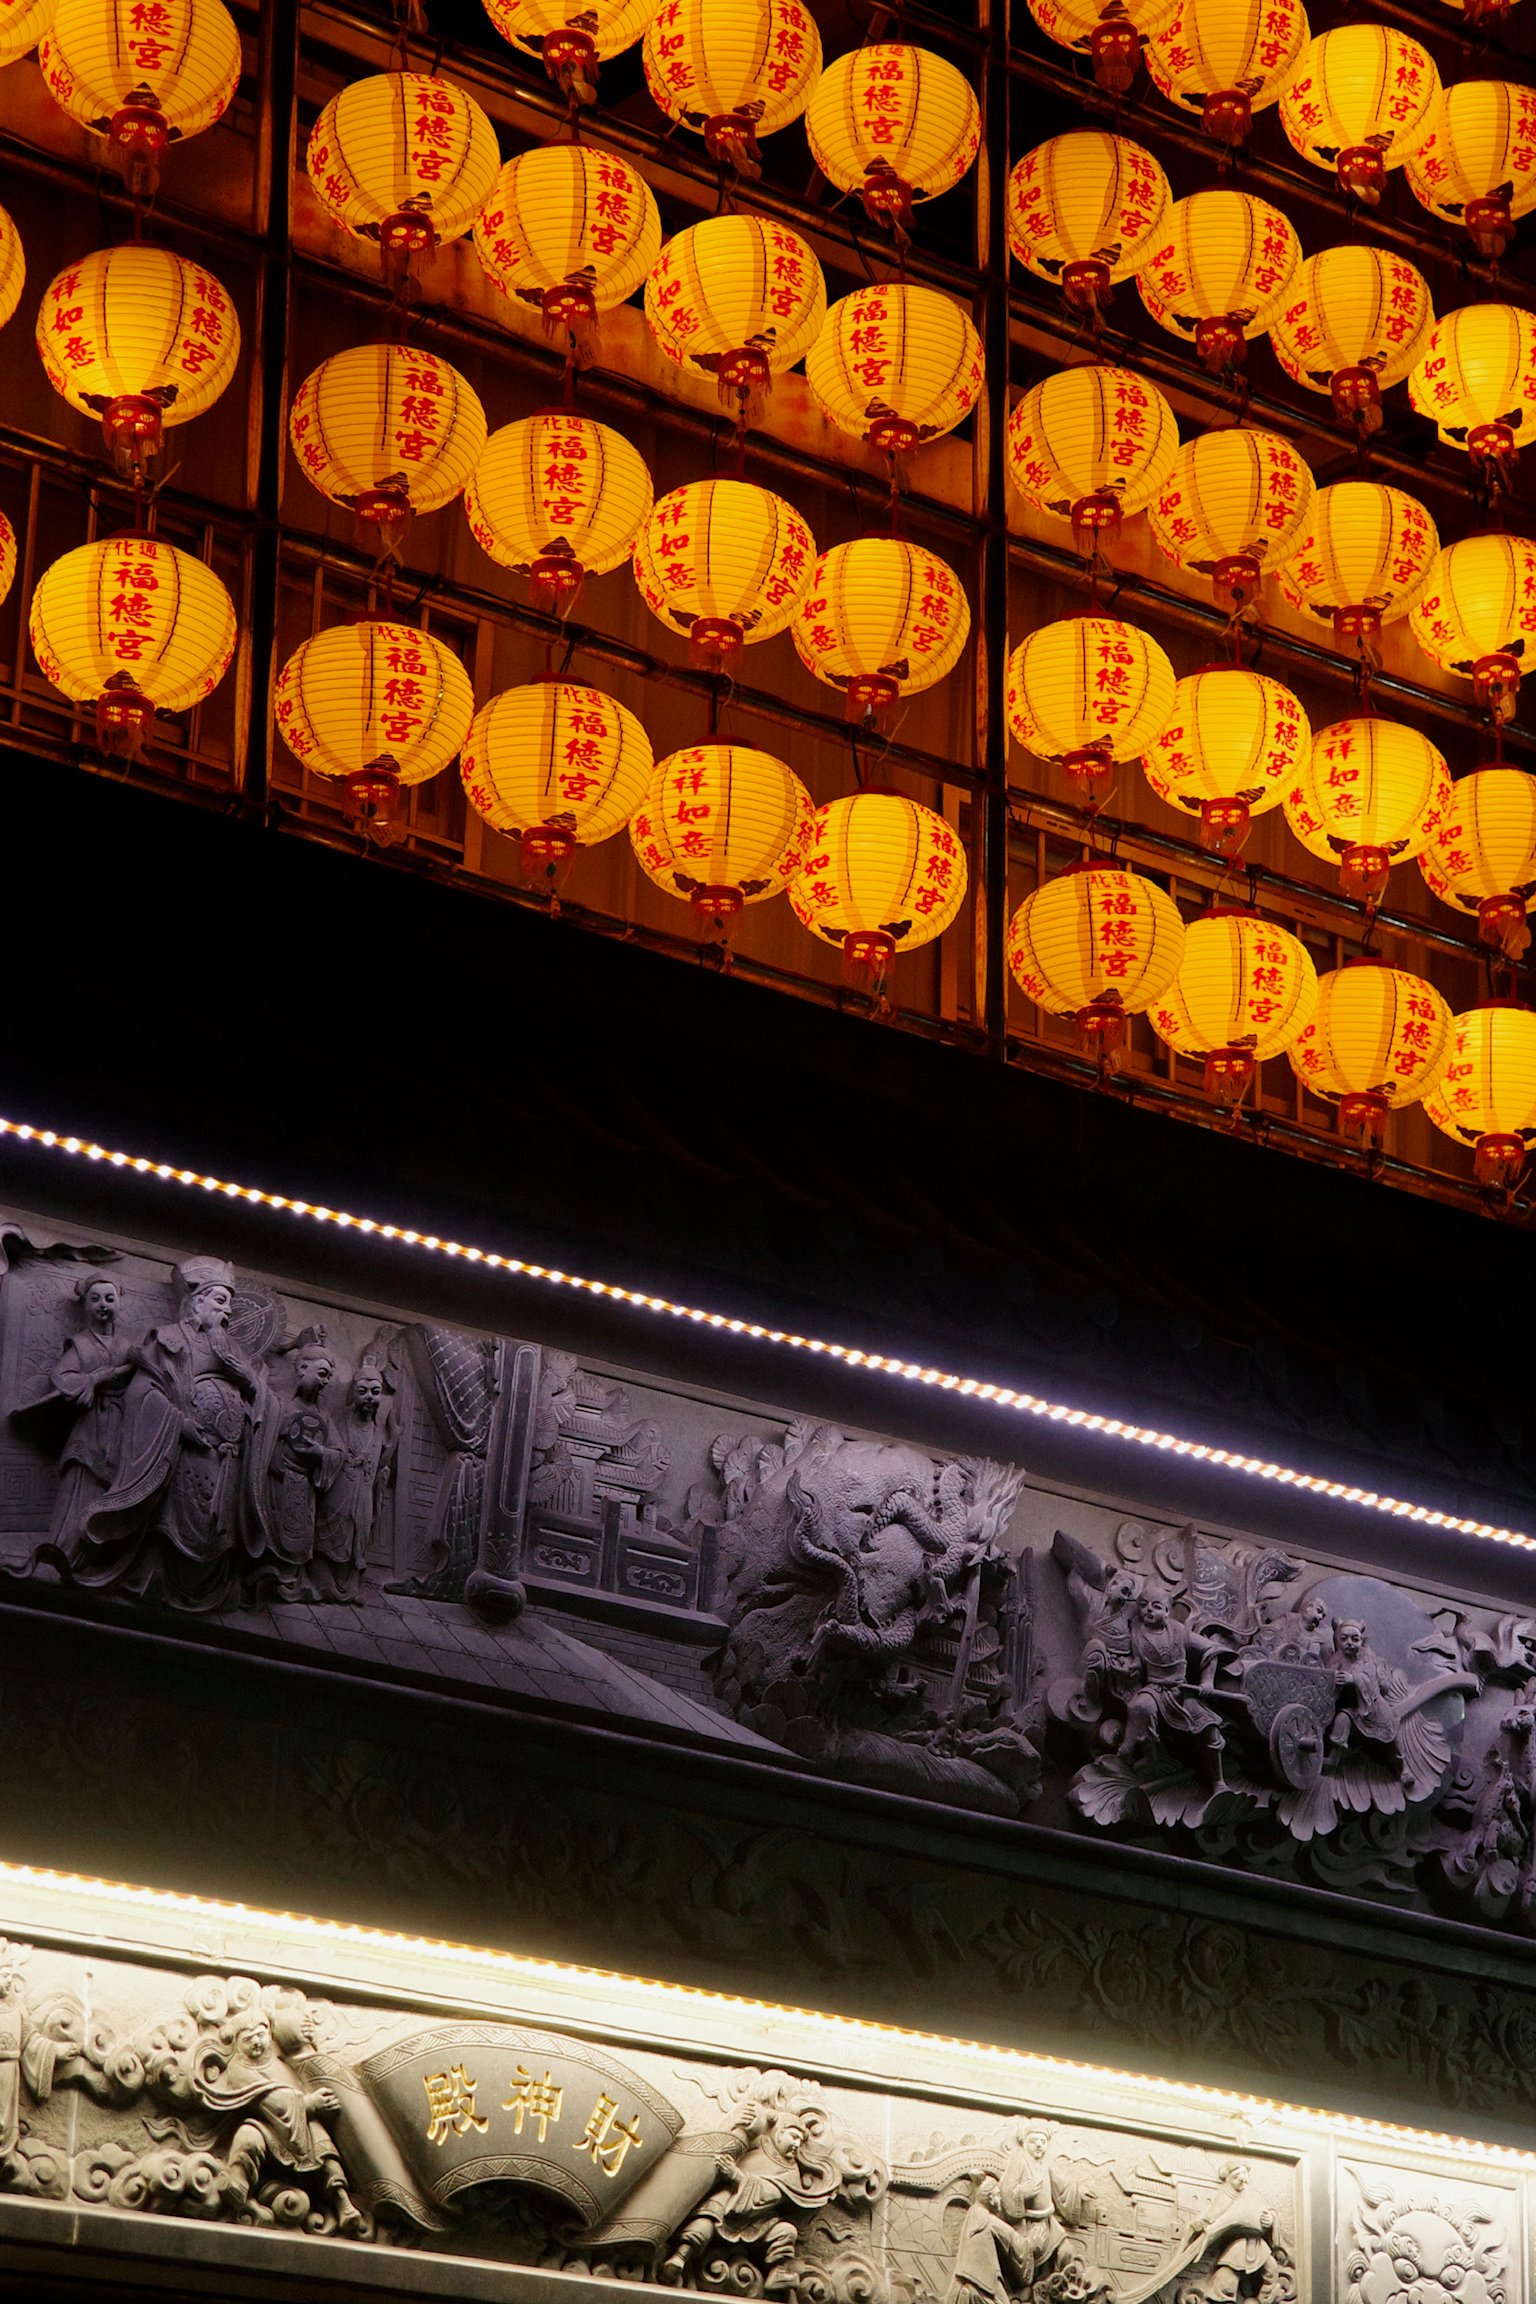 Rows and rows of lanterns lit and marked with “TongHua Fu De Temple”, and the structure below says “Temple of the money of God”